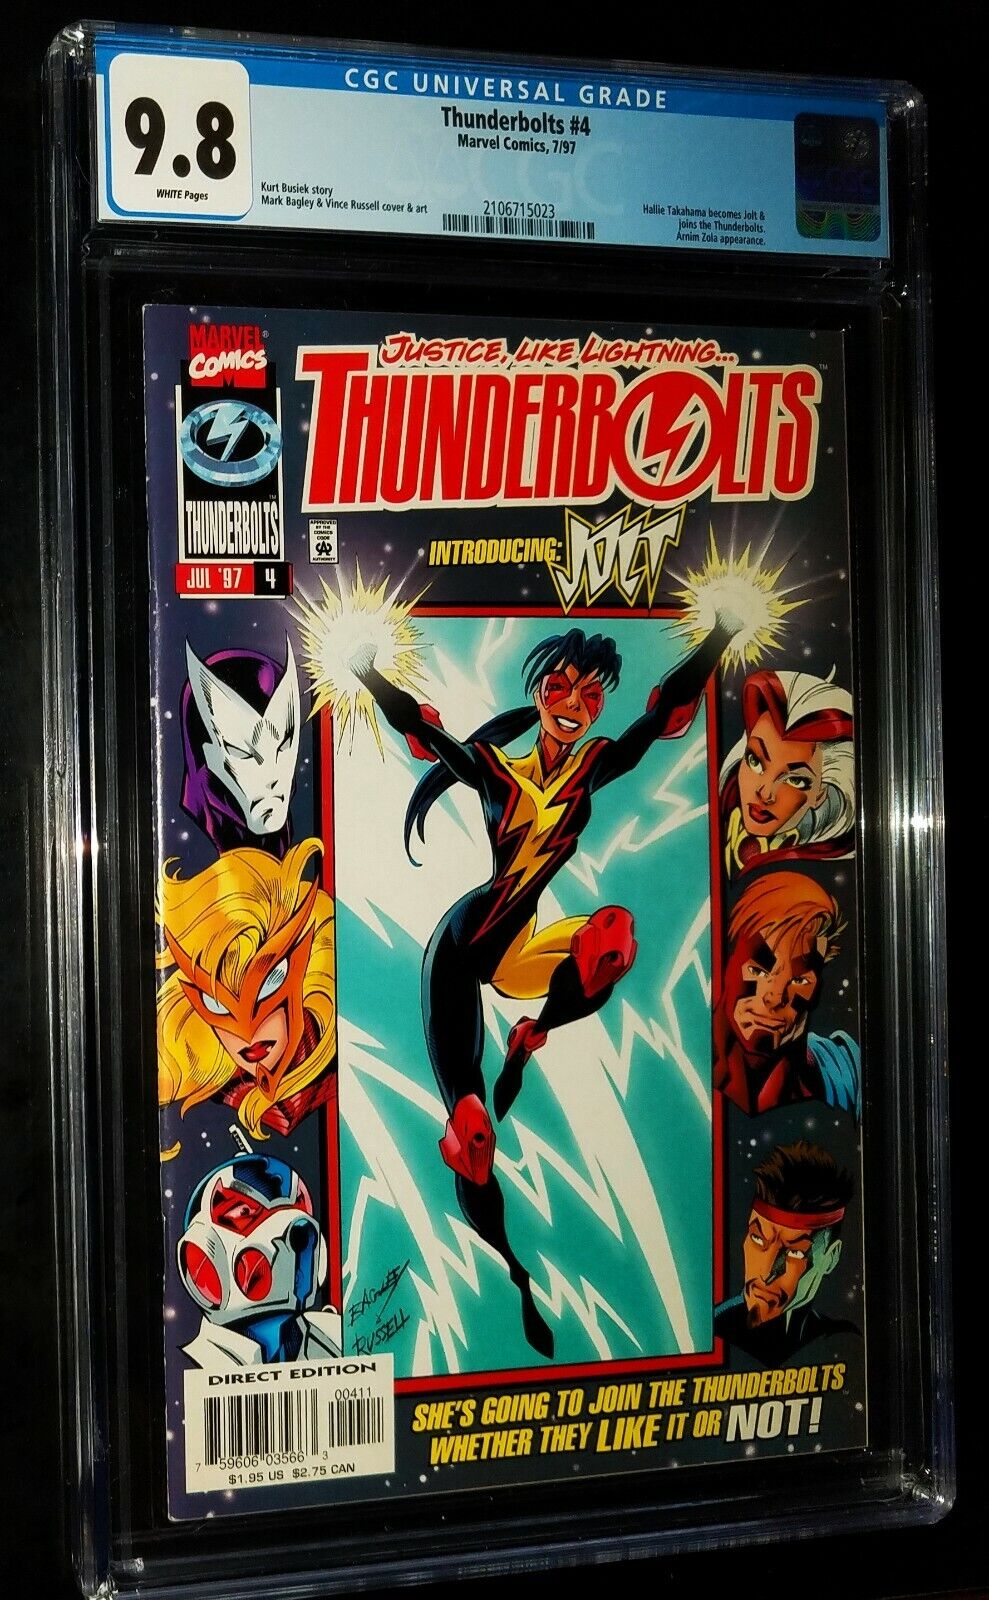 THUNDERBOLTS CGC #4 1997 Marvel Comics CGC 9.8 NM/MT White Pages 0626